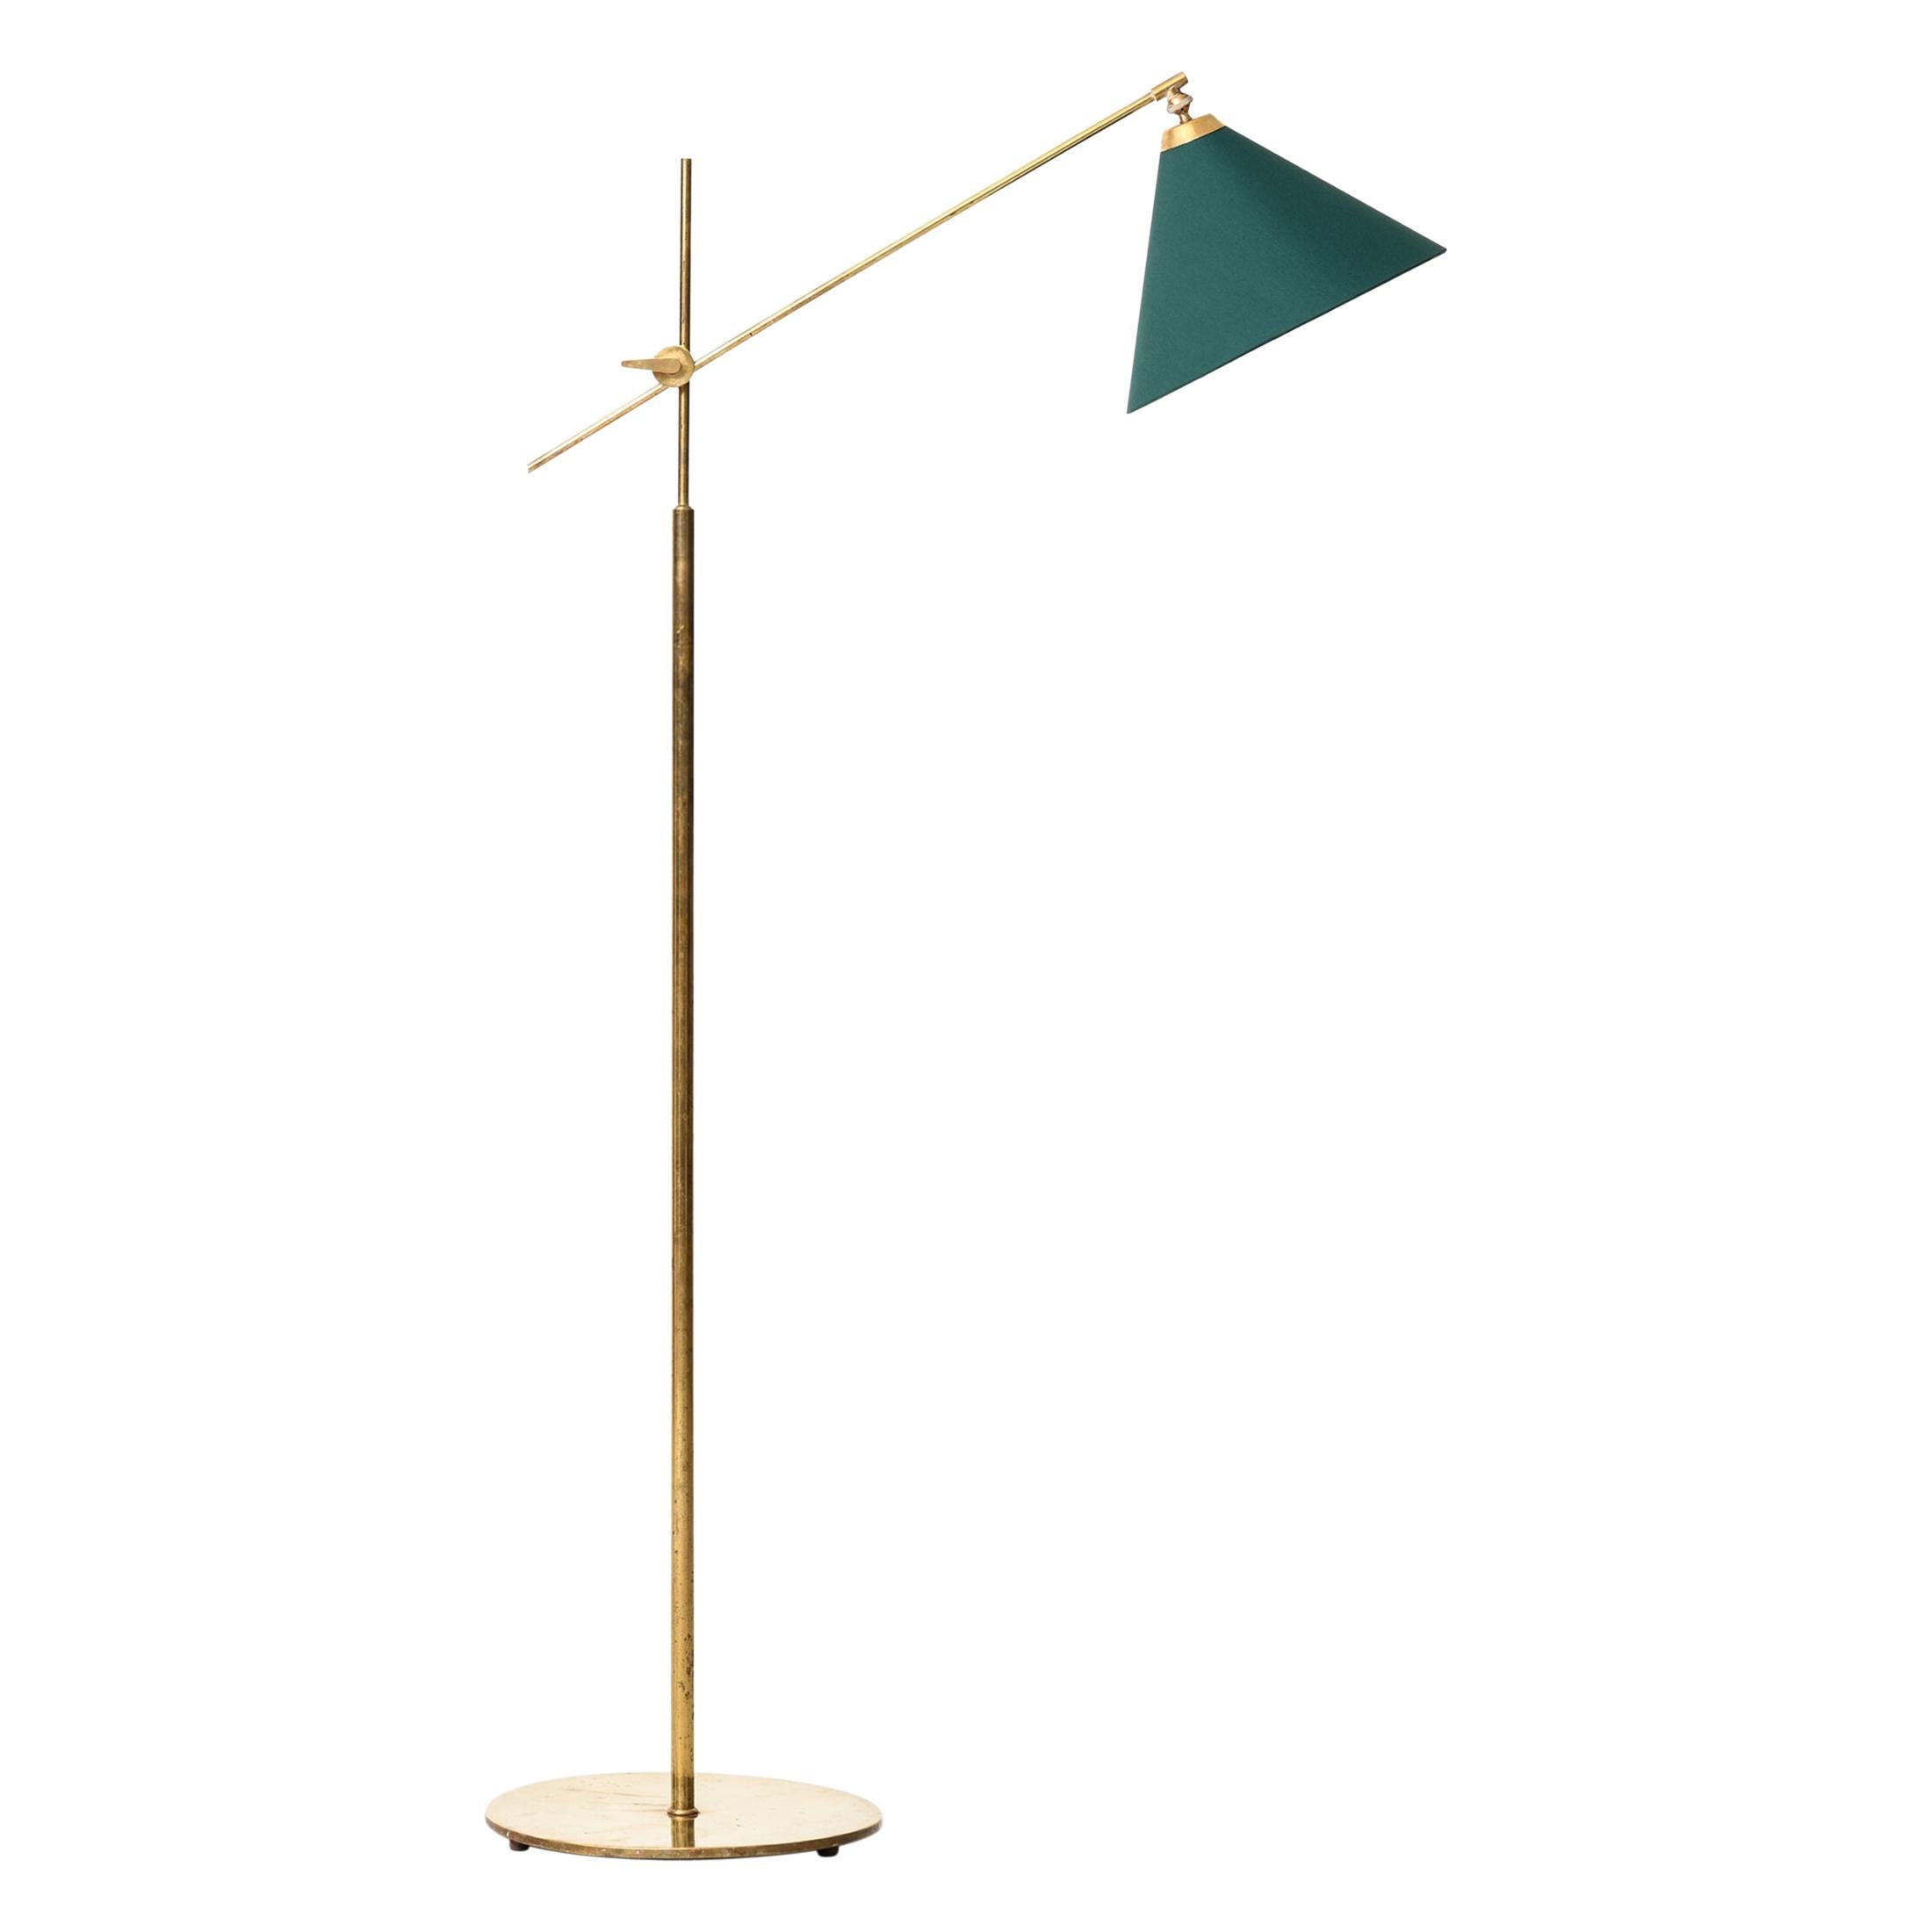 T.H. Valentiner Floor Lamp Produced by Poul Dinesen in Denmark